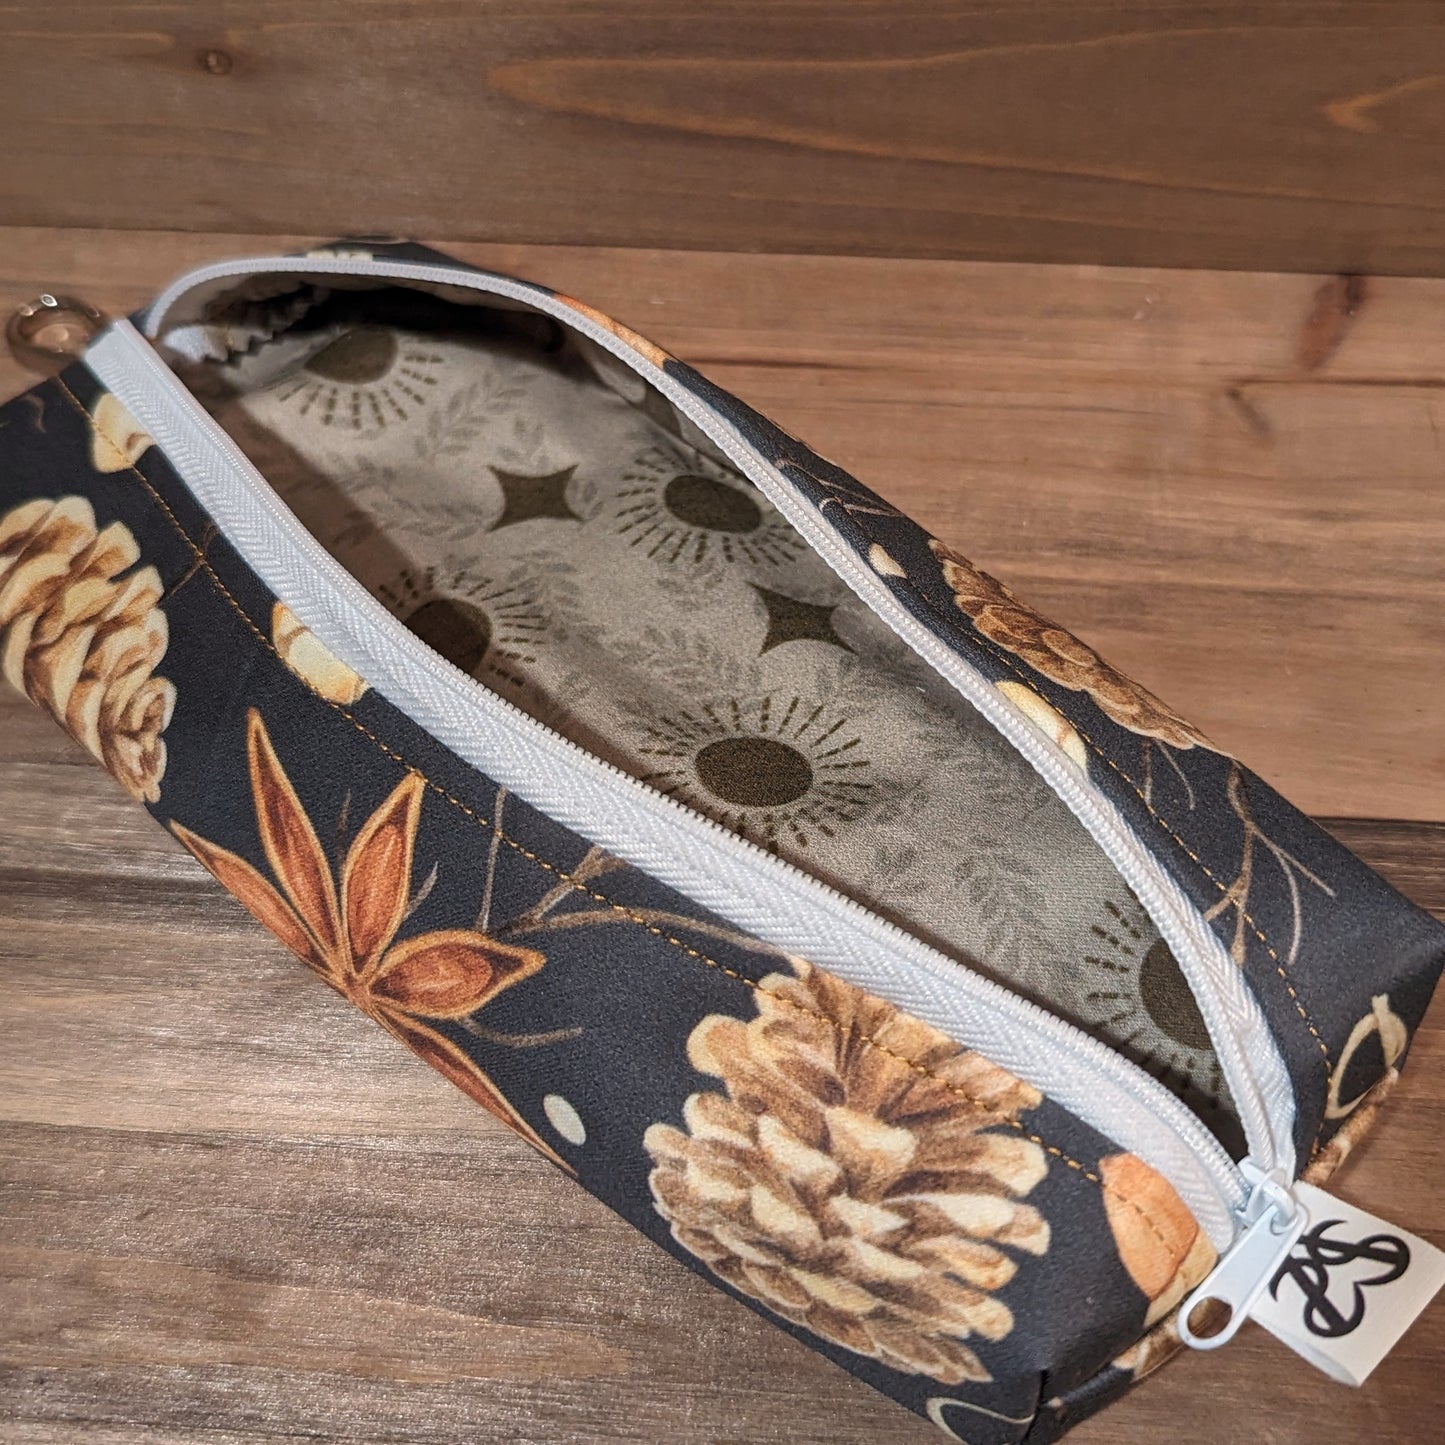 A long skinny pencil case with a keychain top has star anise, acorn, sticks, and pinecones outside and a white zipper up the middle open to show the moon, sun, and star print liner.